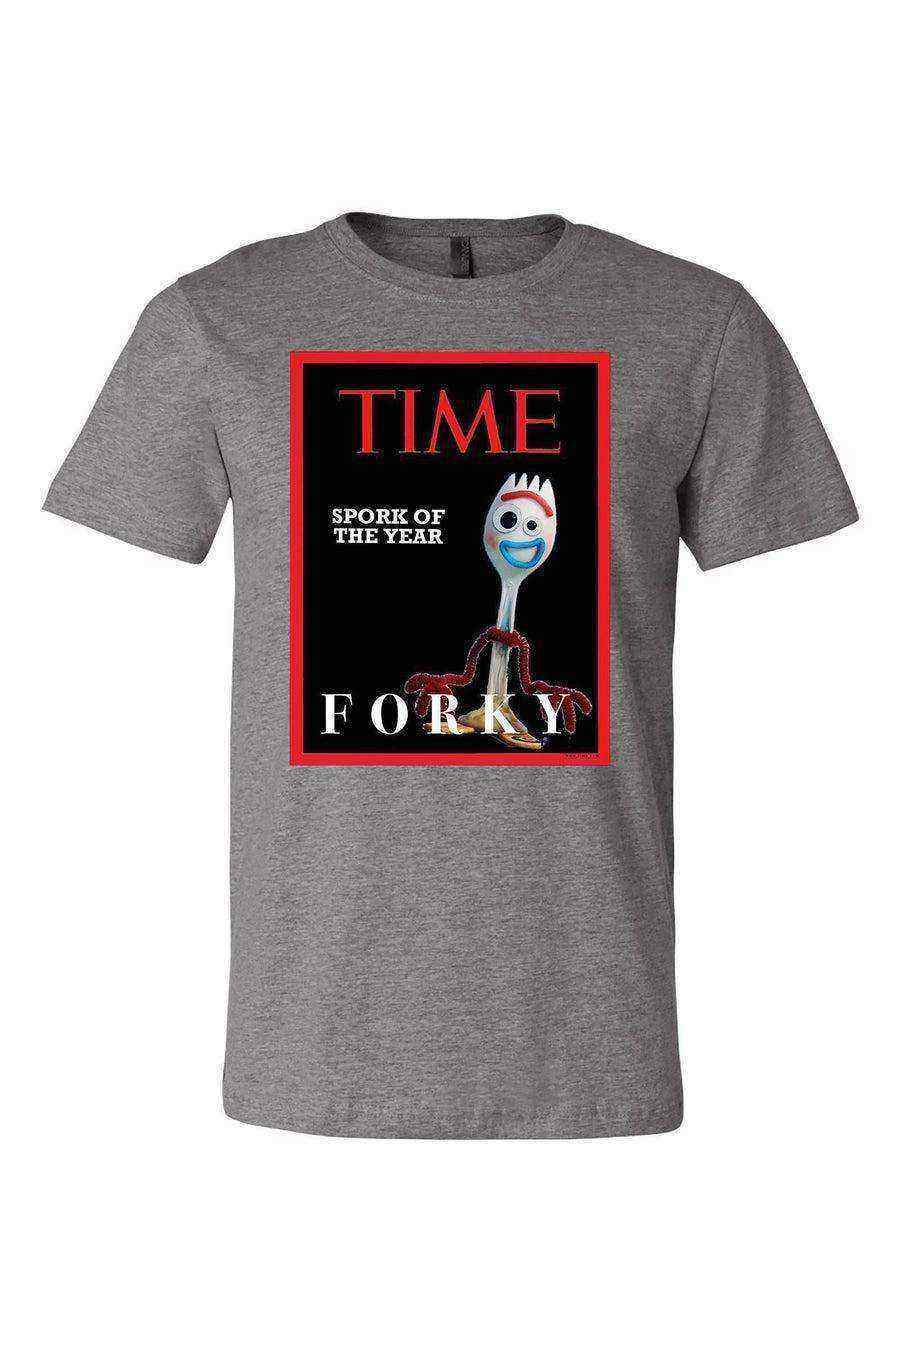 Forky Spork Of The Year Shirt | Forky On The Cover Of Time Shirt - Dylan's Tees